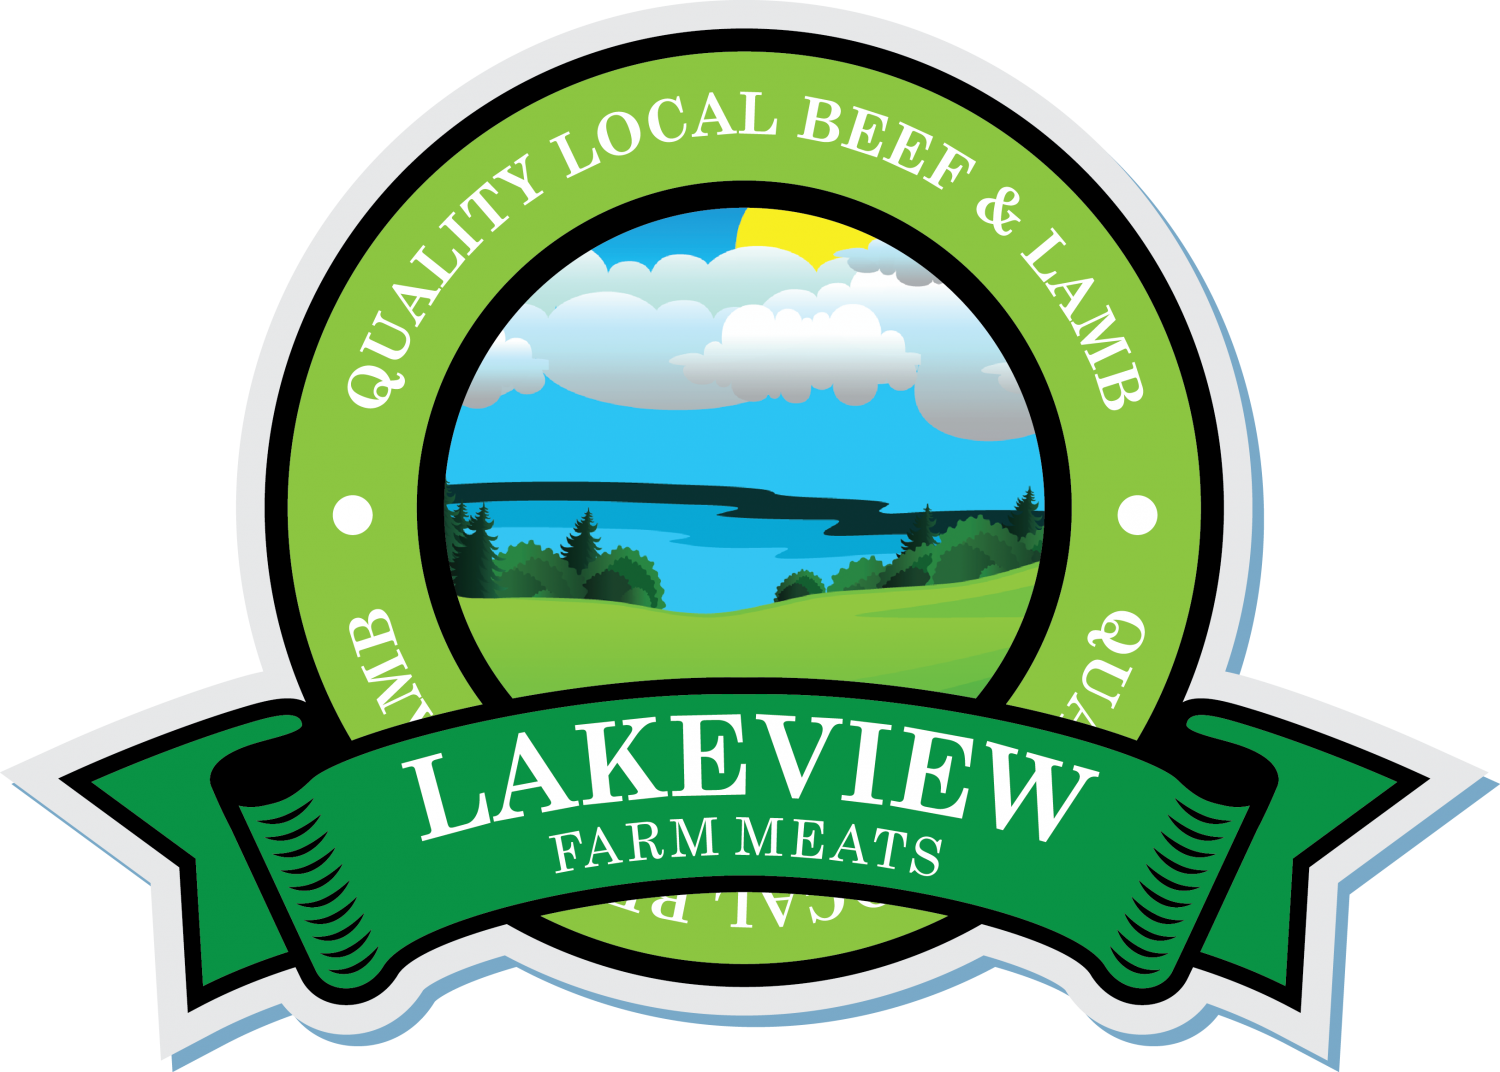 Lakeview Farm Meats Abattoir have fully implemented the NOUVEM Factory Management System